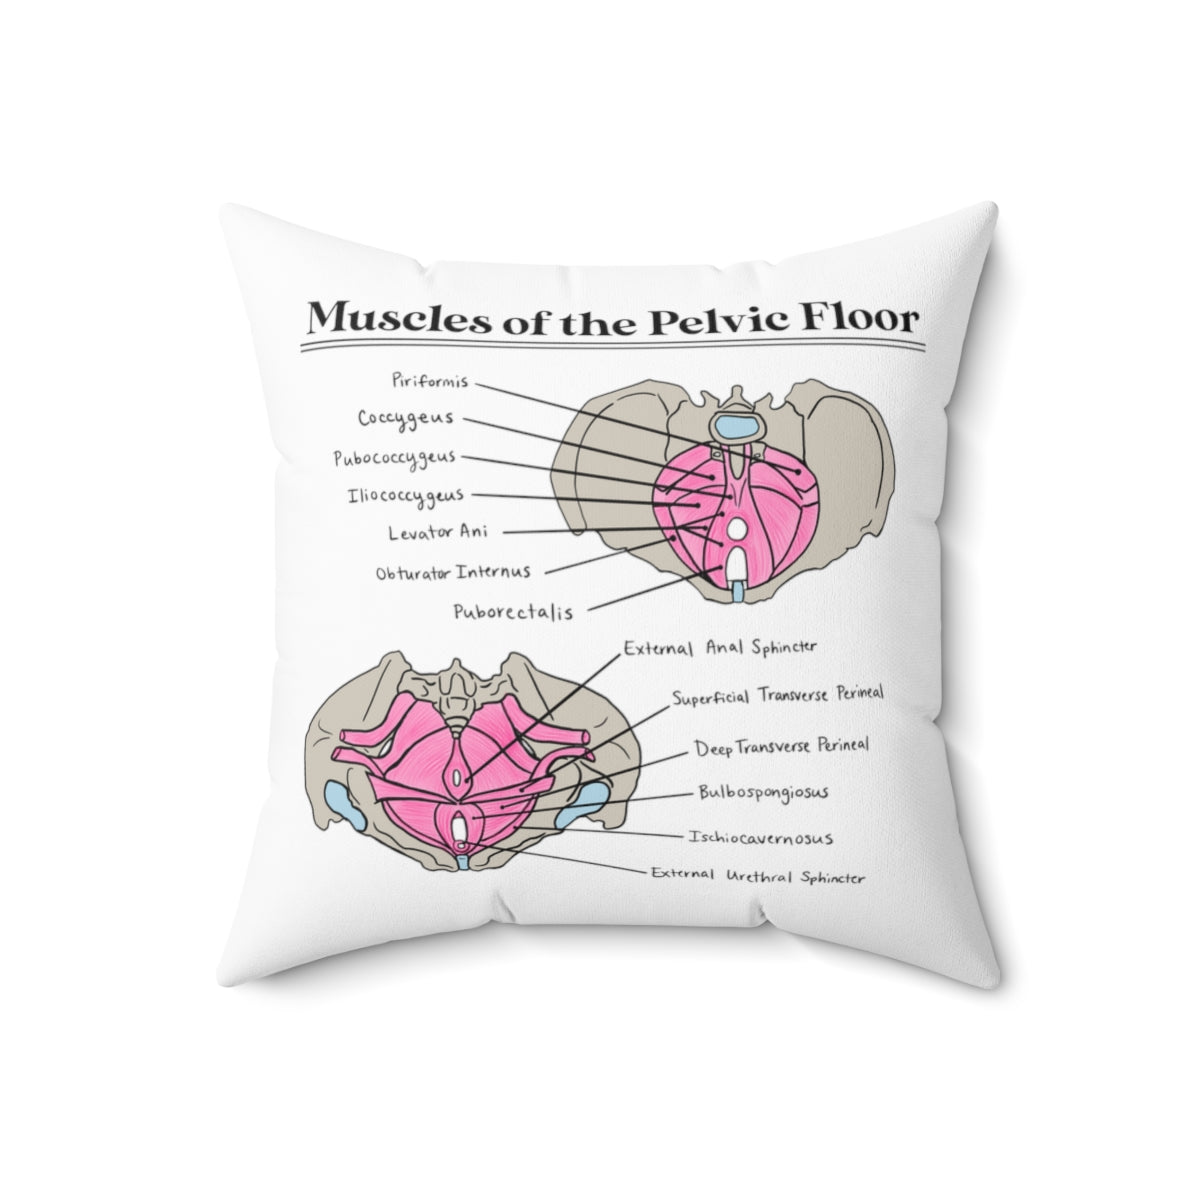 Muscles of the Pelvic Floor Pillow